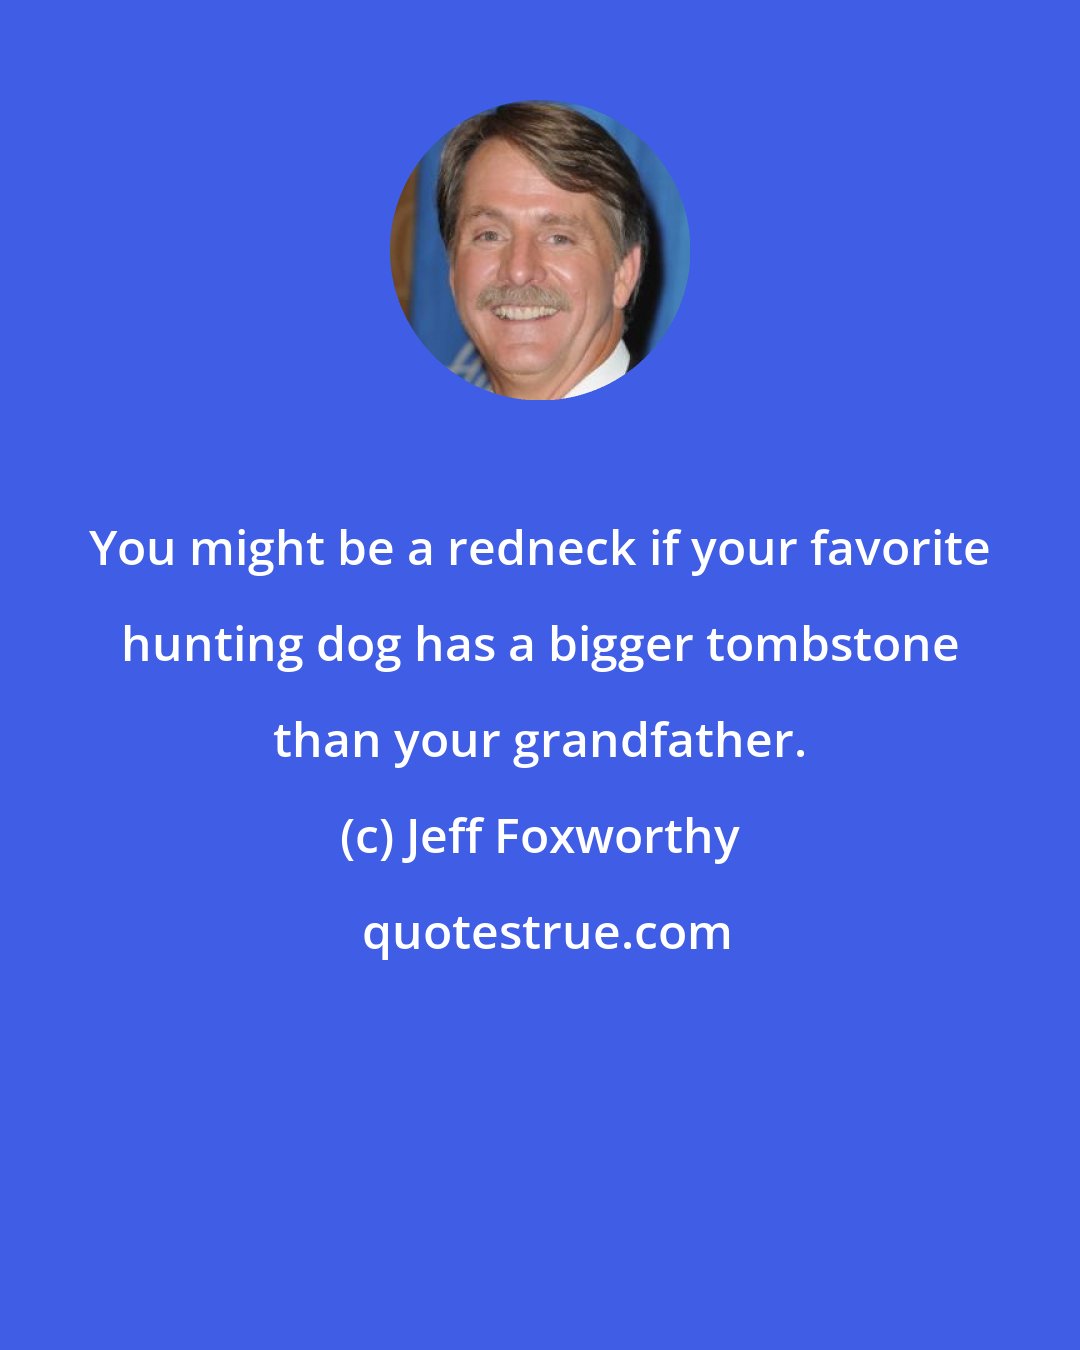 Jeff Foxworthy: You might be a redneck if your favorite hunting dog has a bigger tombstone than your grandfather.